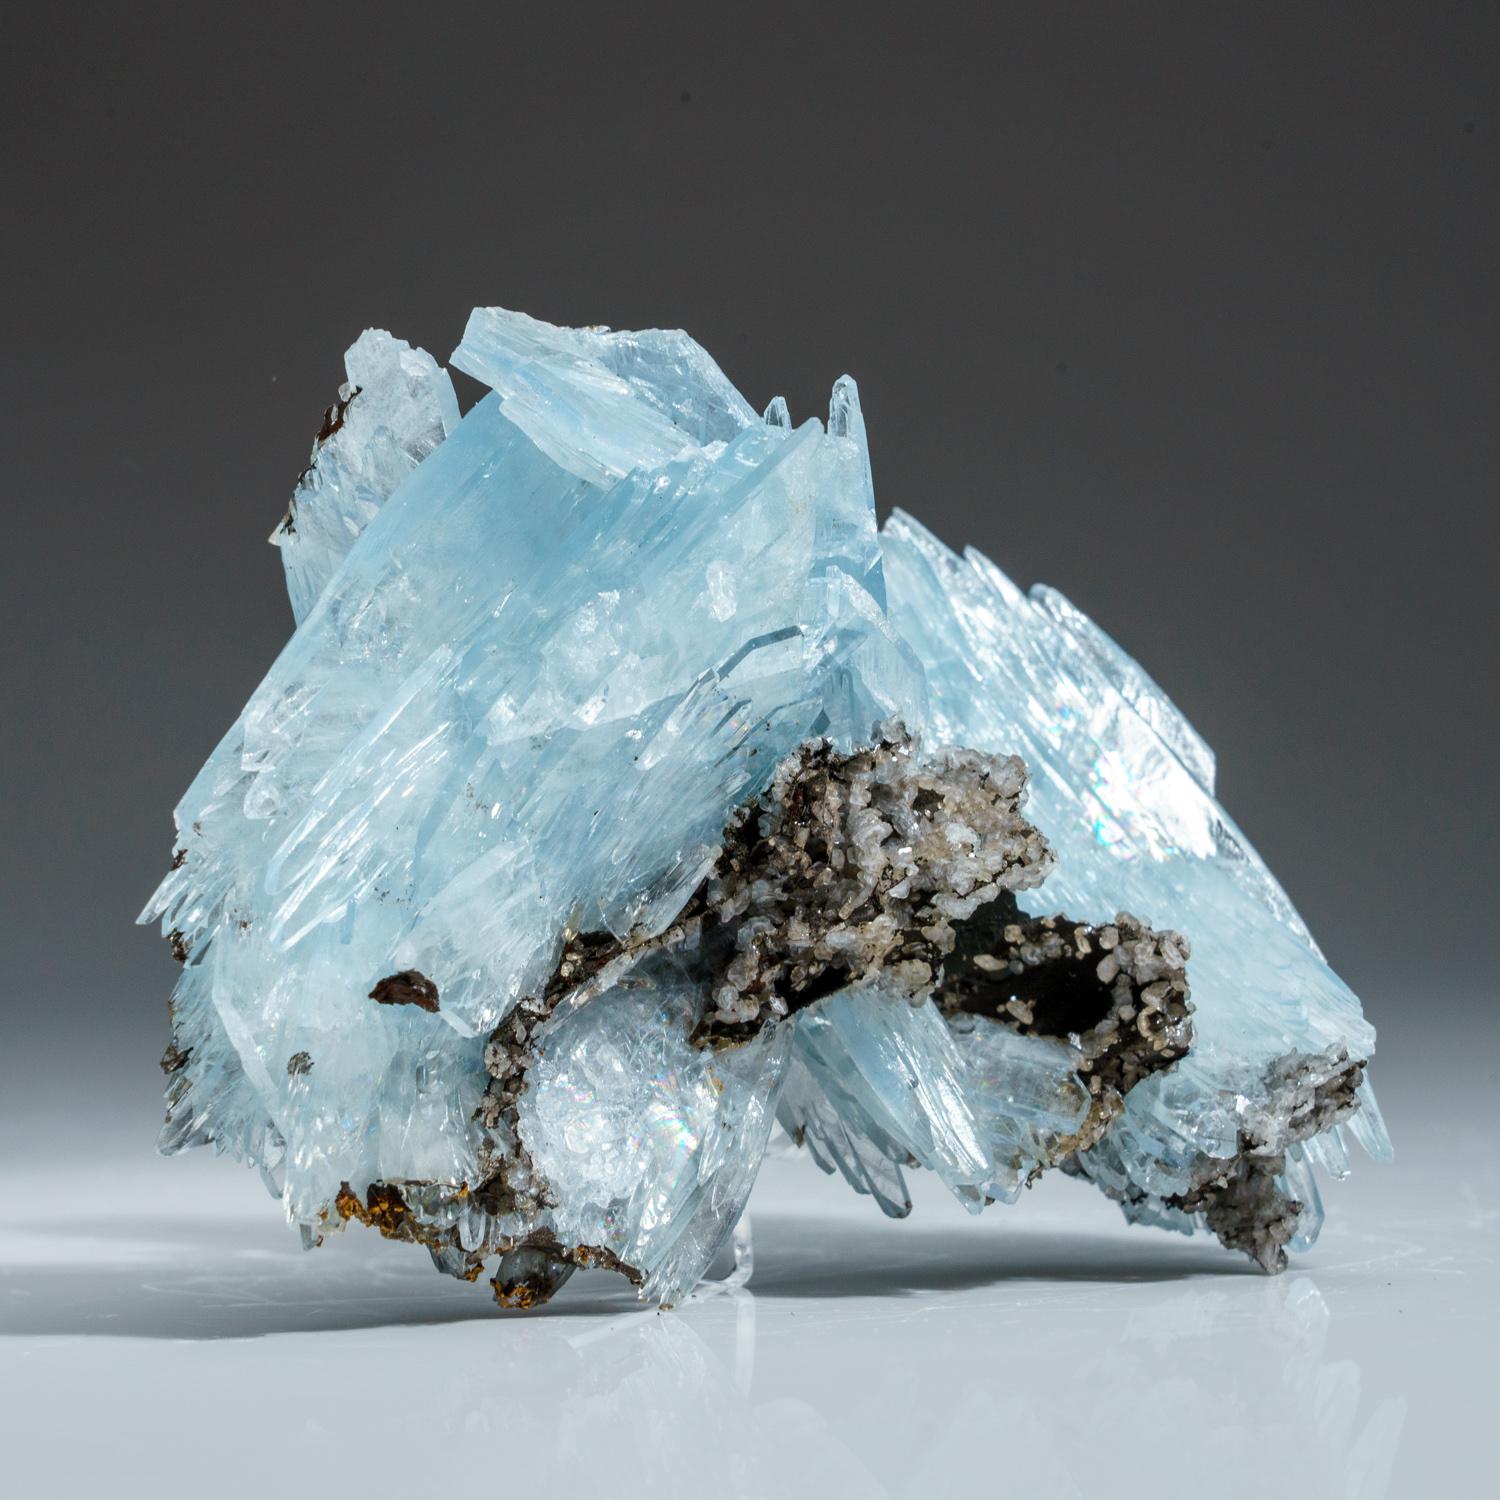 Barite from Jebel Ouichane, Sagangane, Nador Province, L'Oriental Region, Morocco

Here is a superb cluster of these incredible new blue Barites that have been discovered this past year. The crystal growth is in a radial parallel and divergent